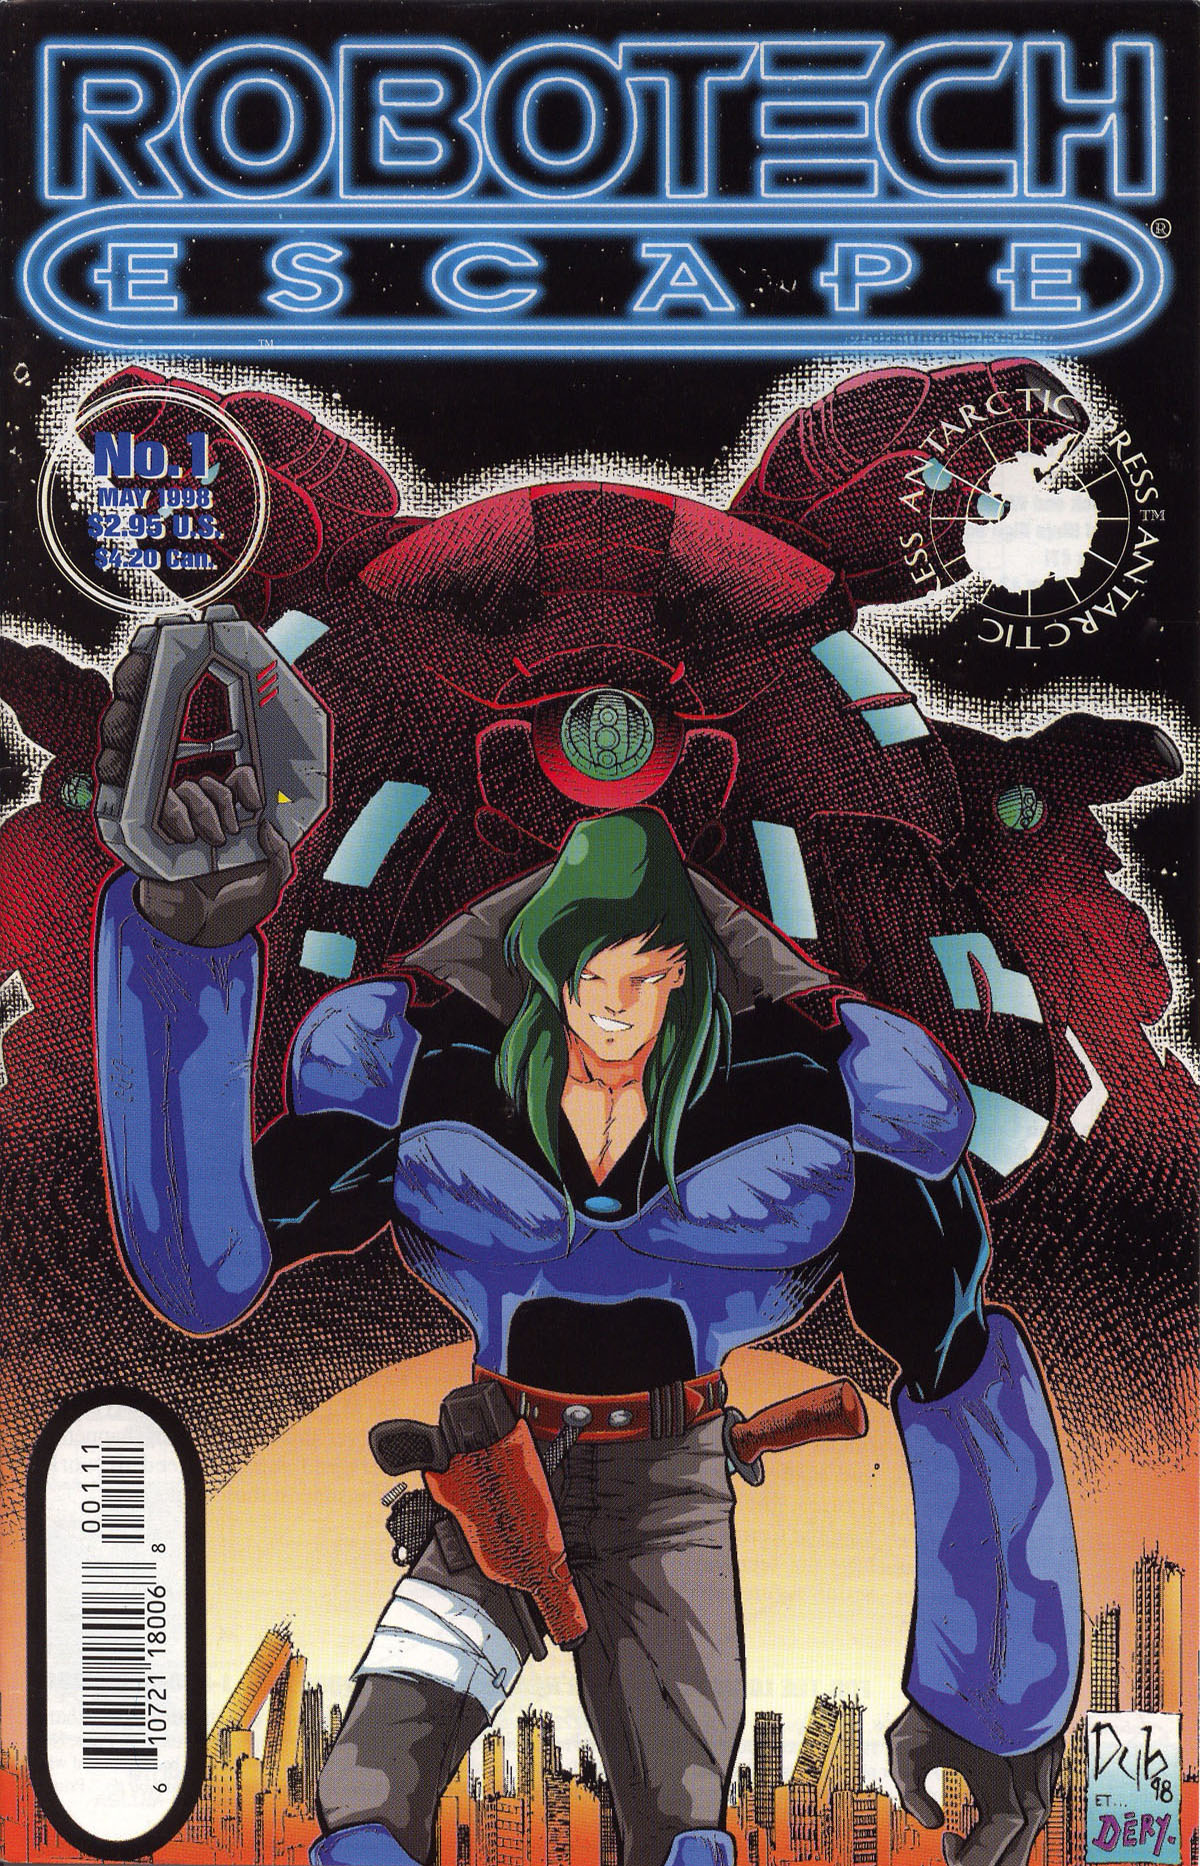 Read online Robotech Escape comic -  Issue # Full - 1